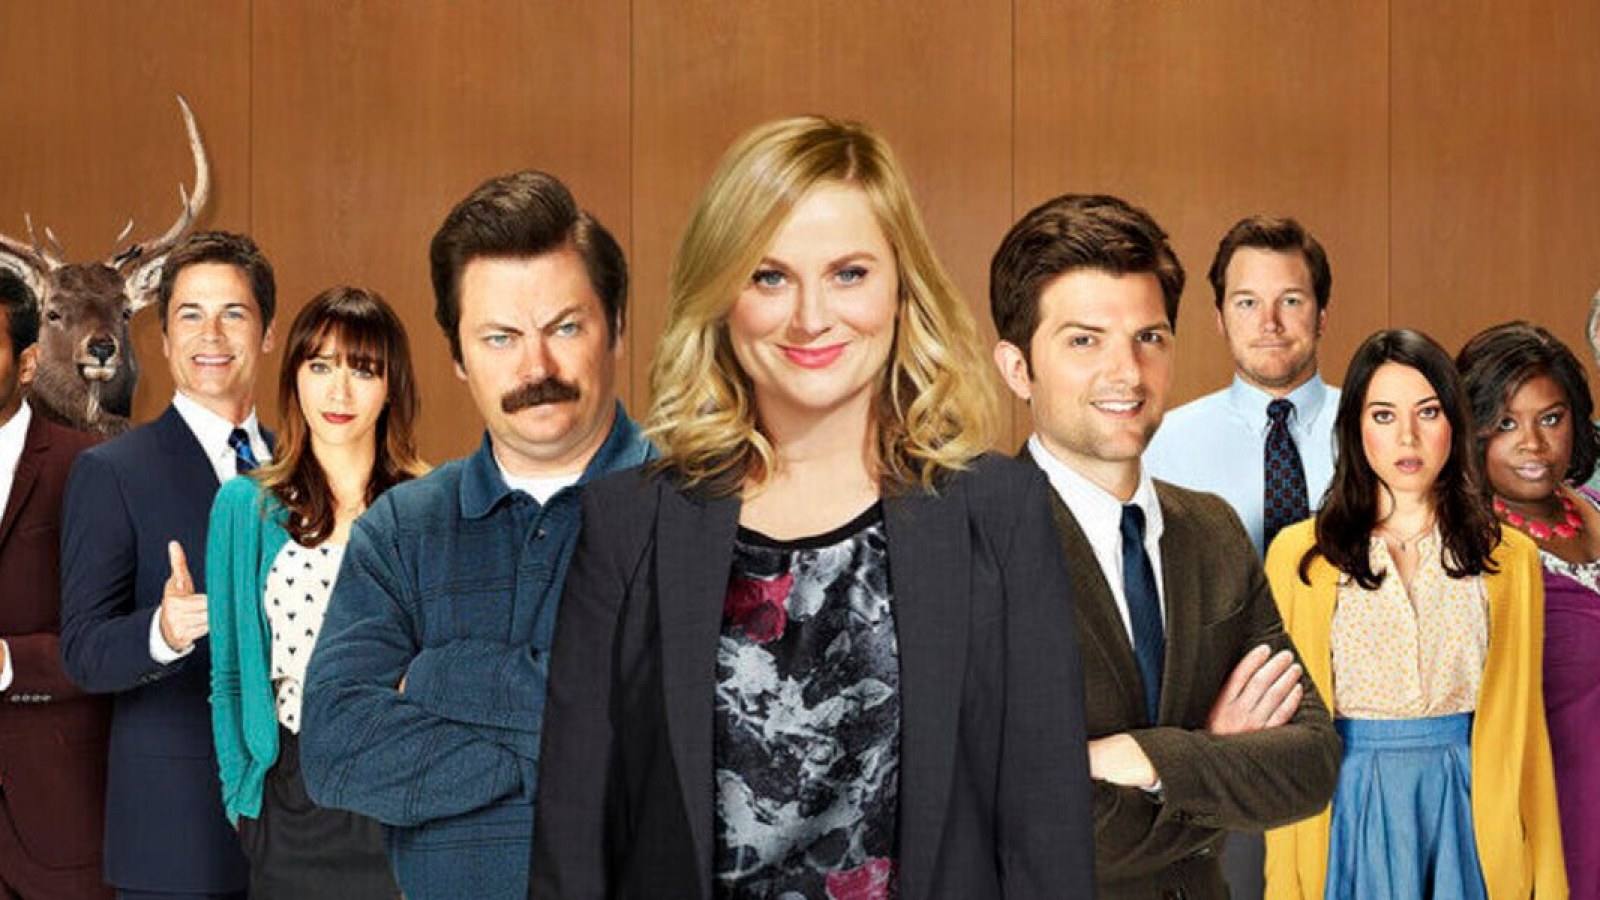 Is Parks and Recreation on Netflix?